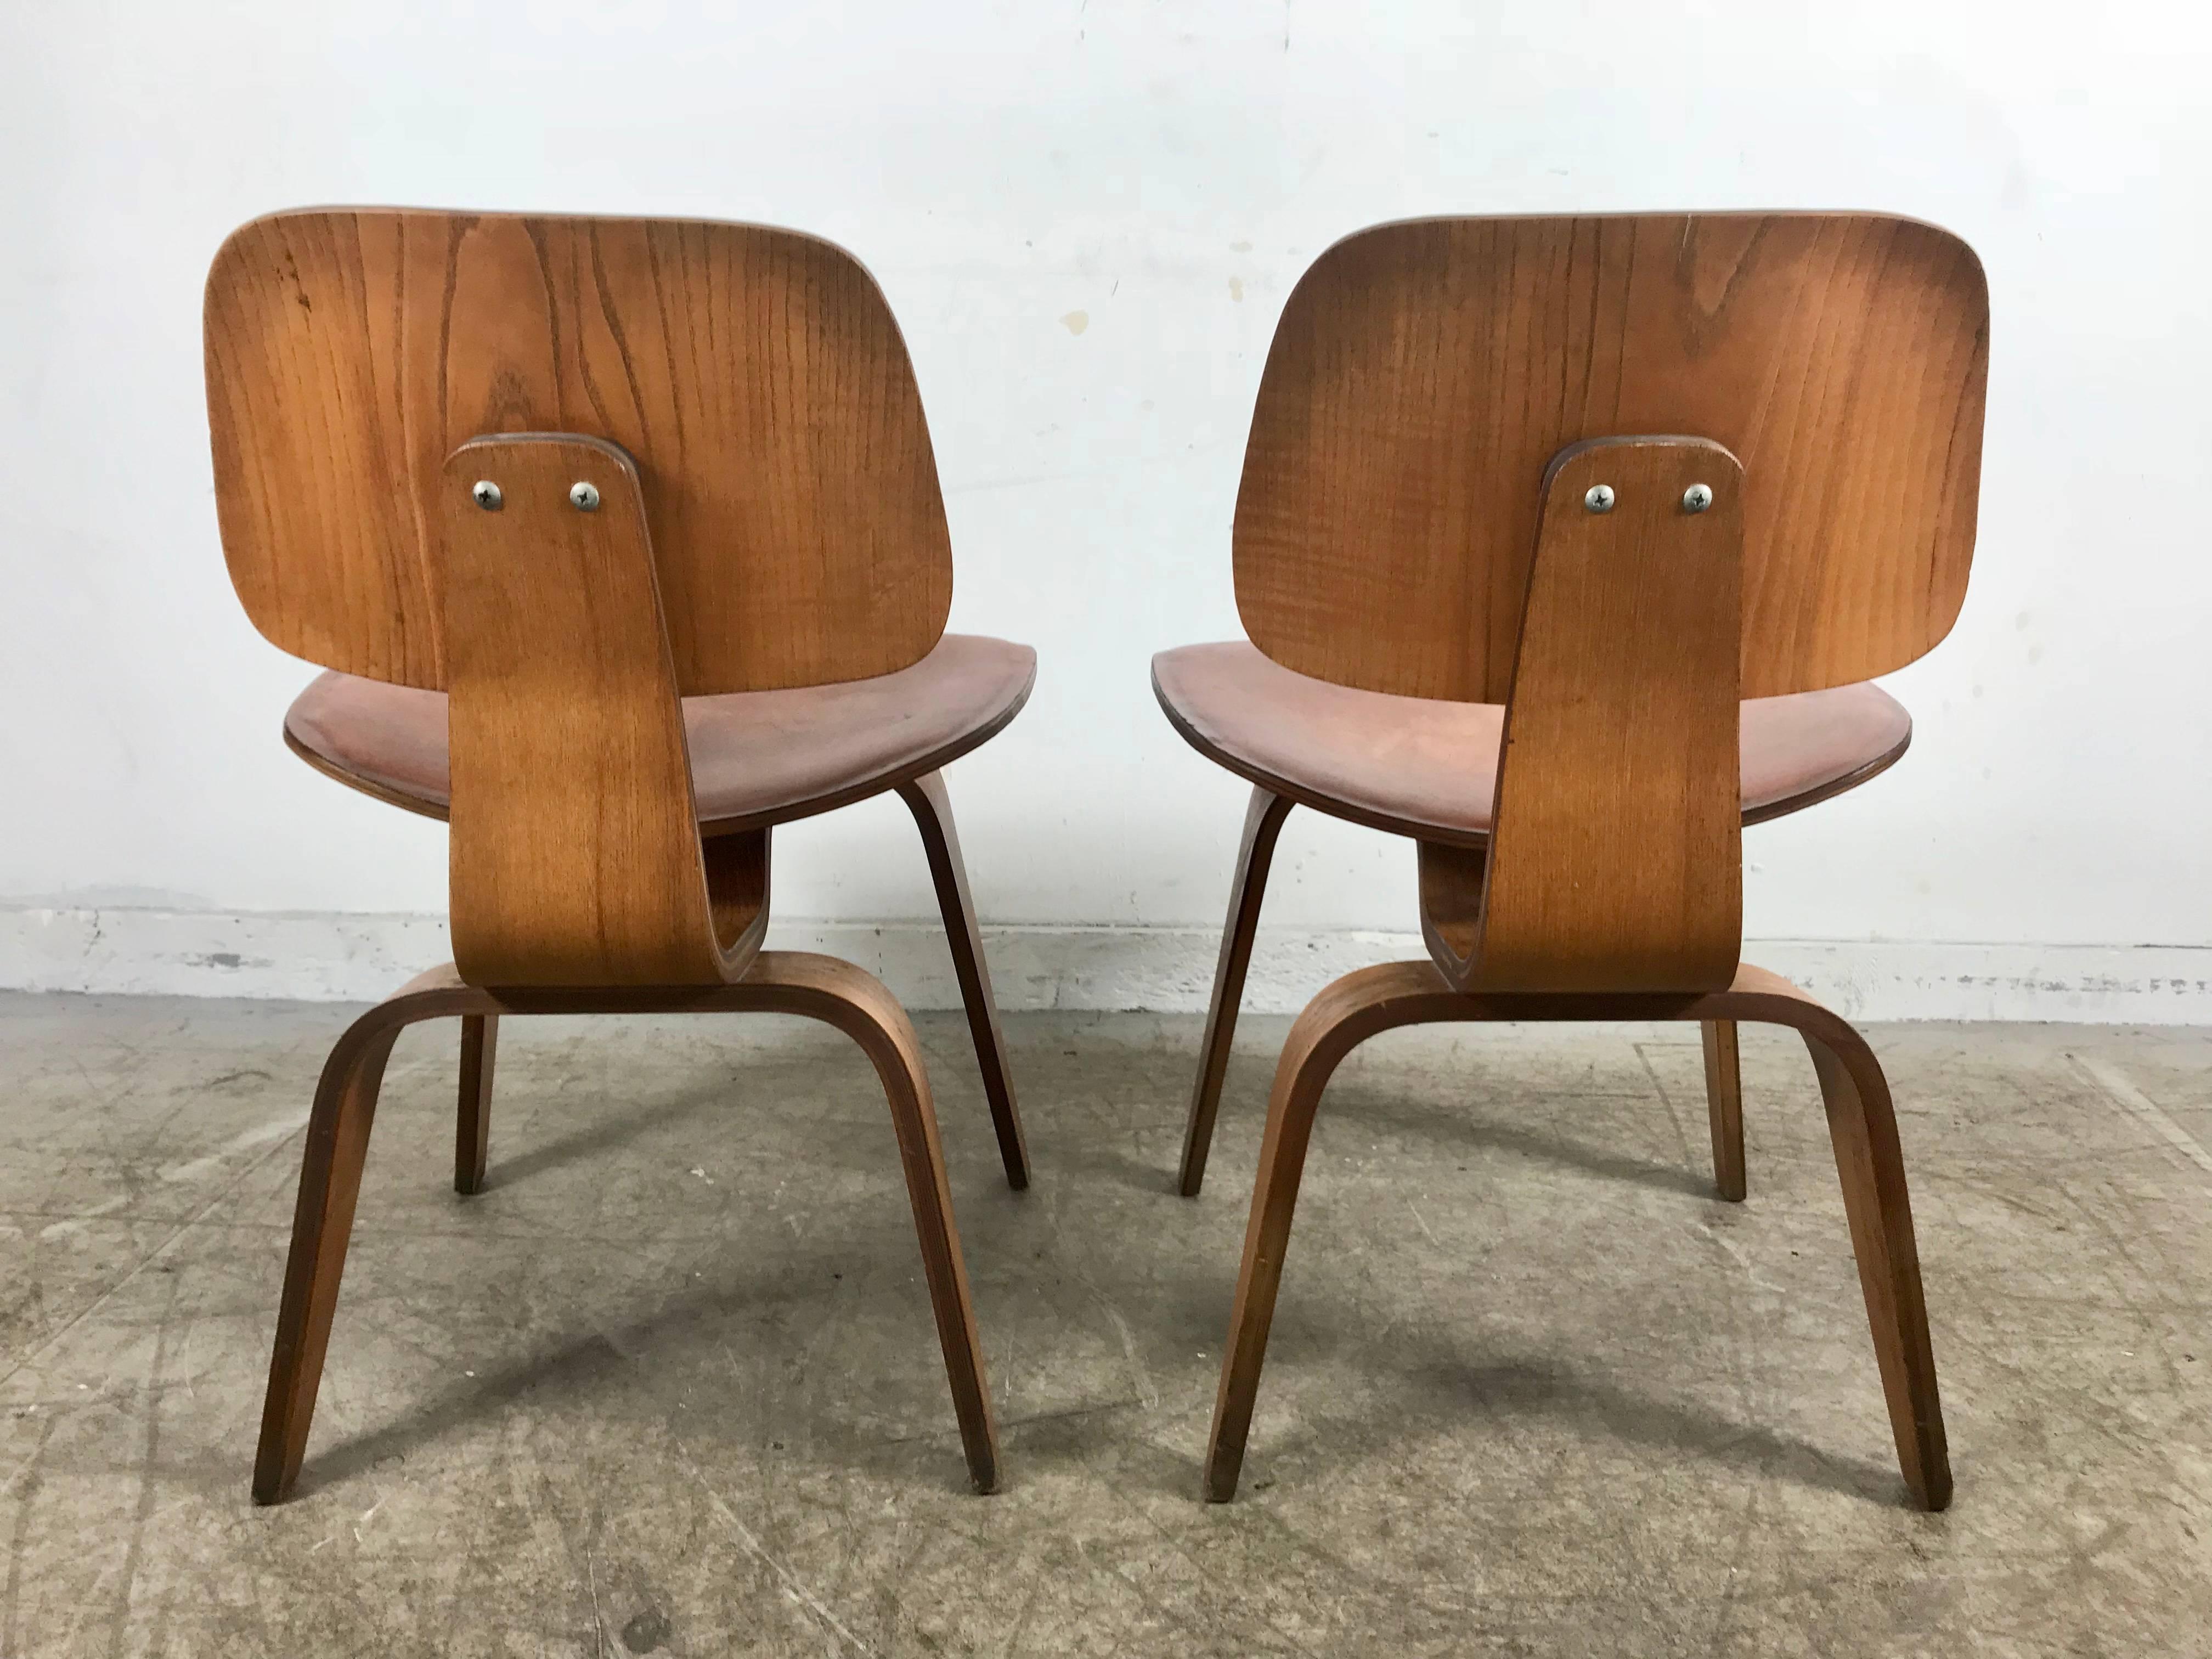 Rare Early Production Pair of Leather and Walnut D C W's by Charles Eames 1